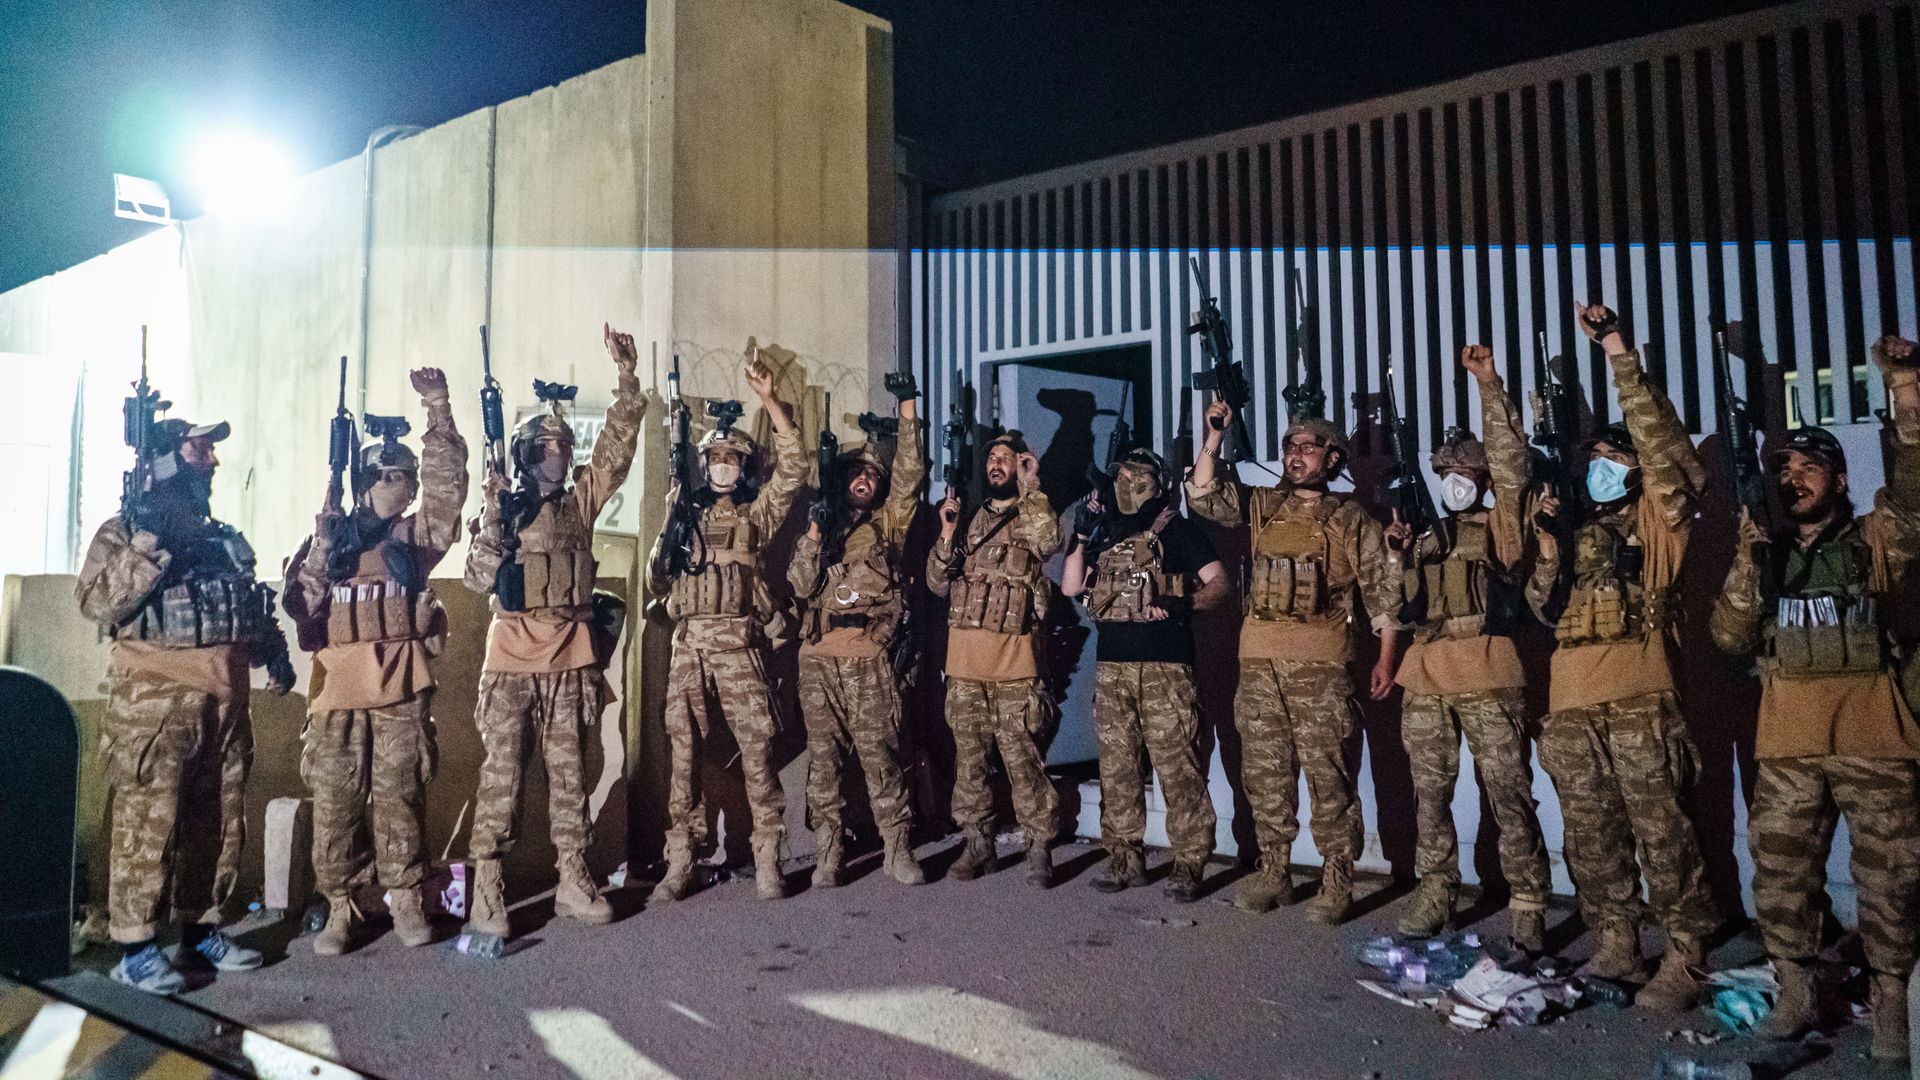  Taliban fighters from the Fateh Zwak unit celebrate before storming into the Kabul International Airport in Kabul, Afghanistan, Tuesday, Aug. 31